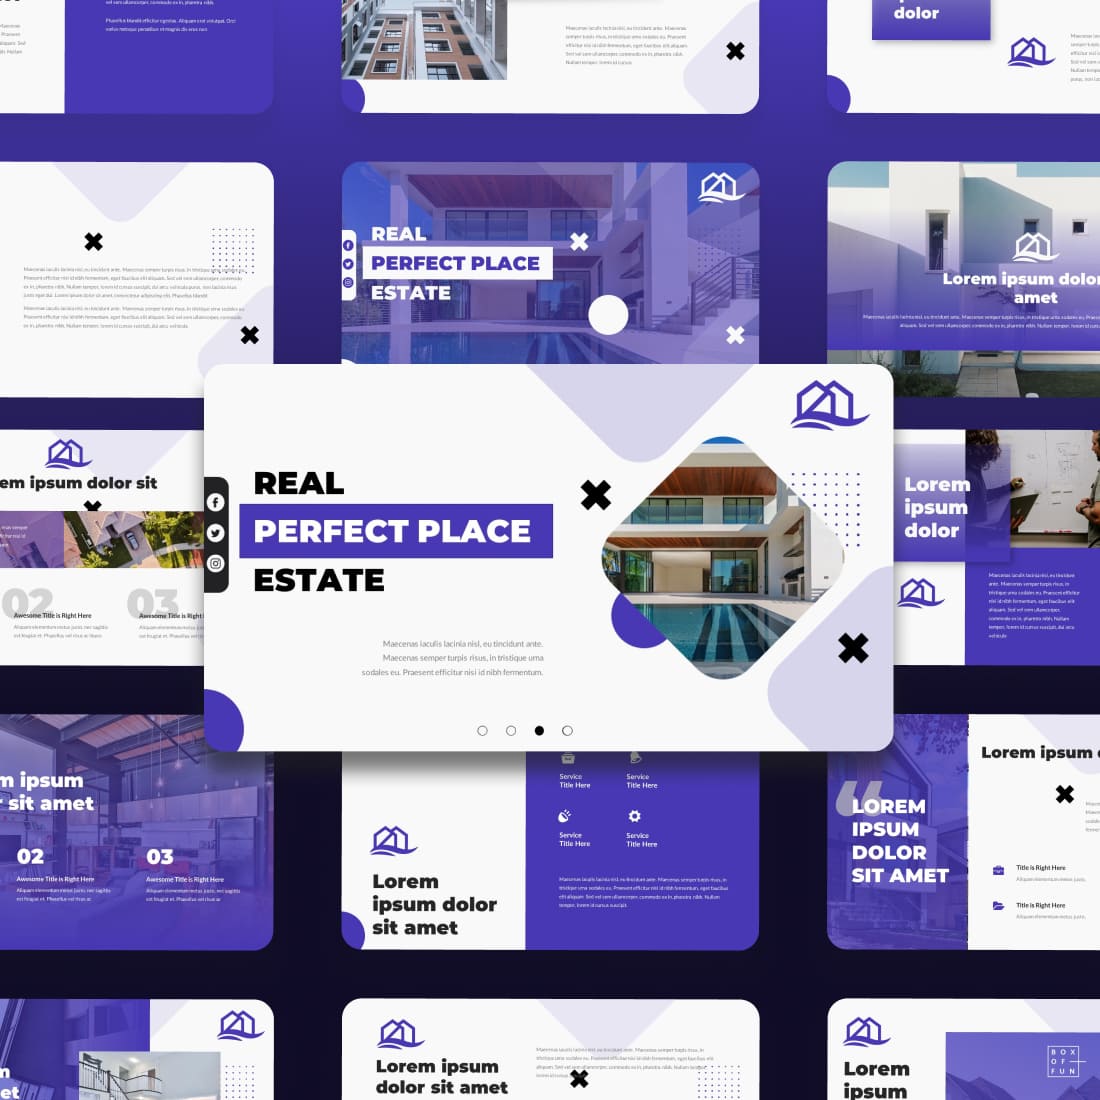 Perfect Place Real Estate Google Slides Theme cover.